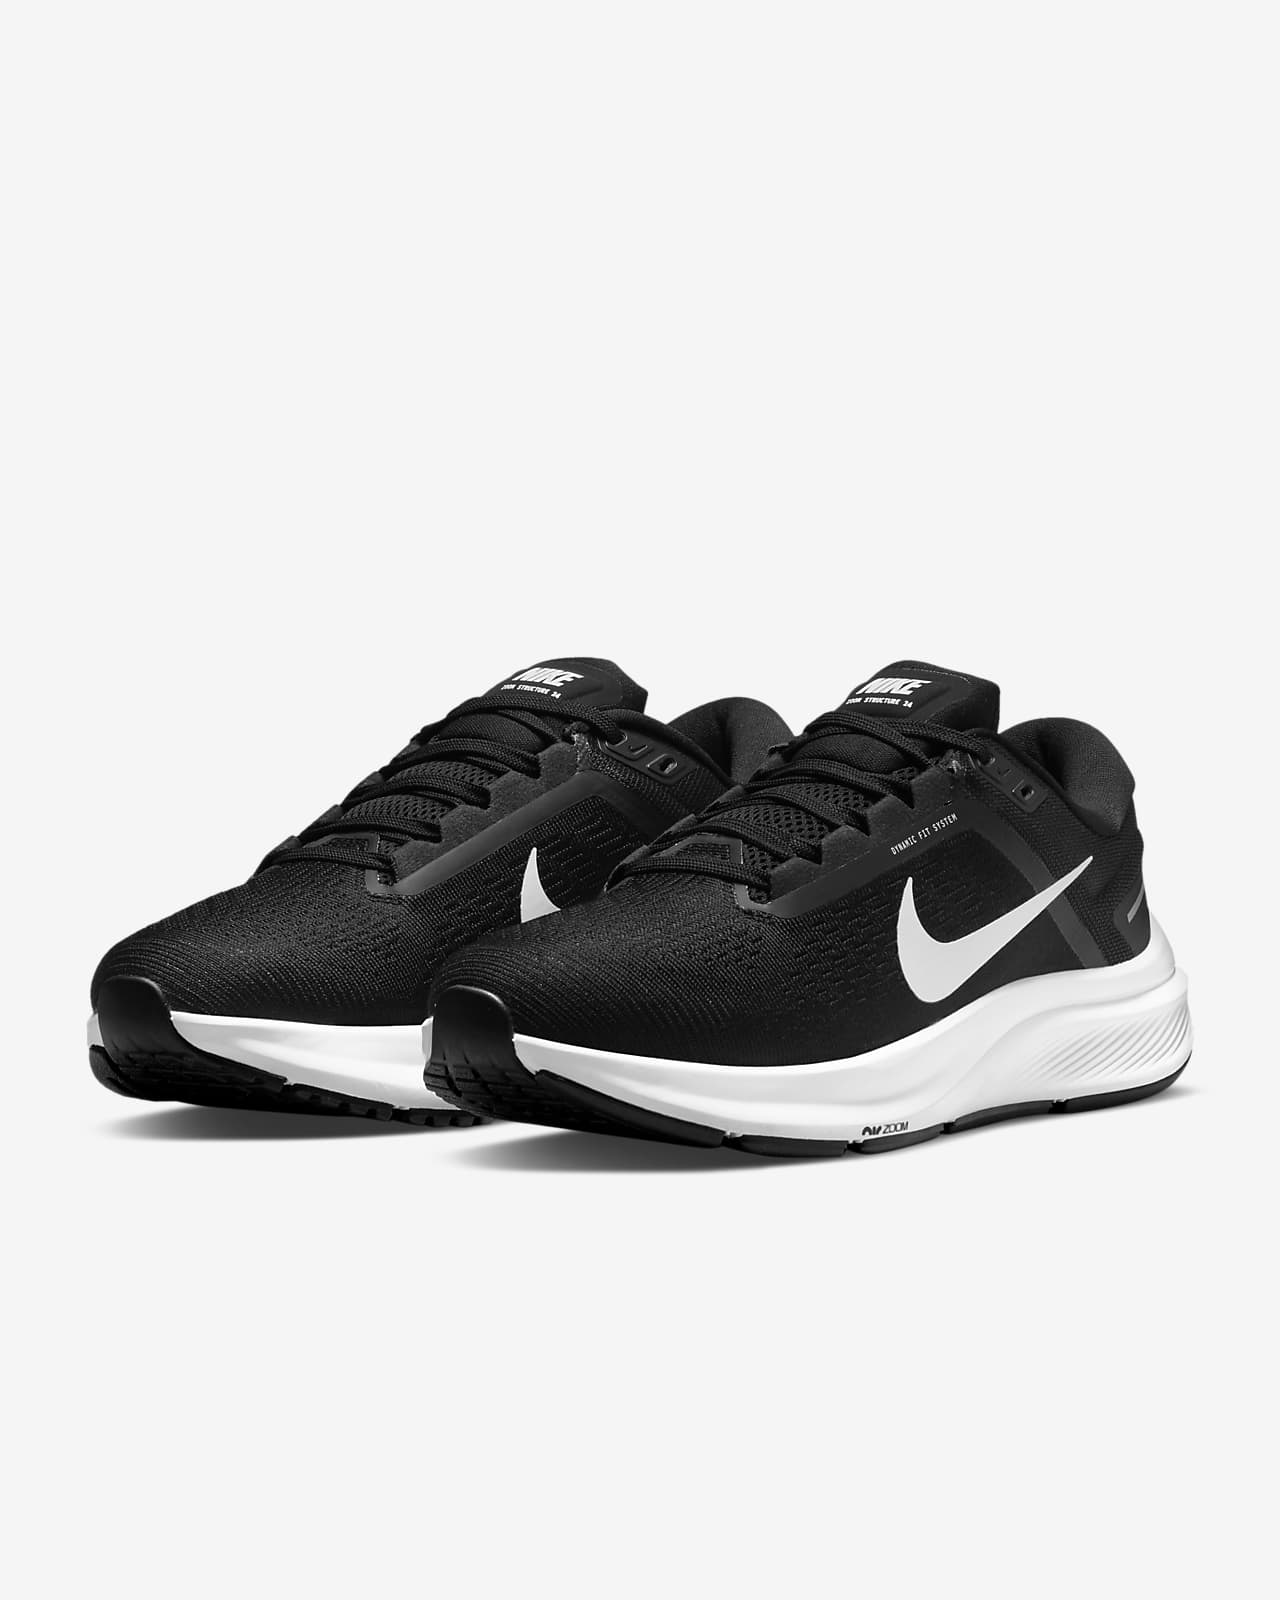 Give frihed mager Nike Structure 24 Women's Road Running Shoes. Nike ZA